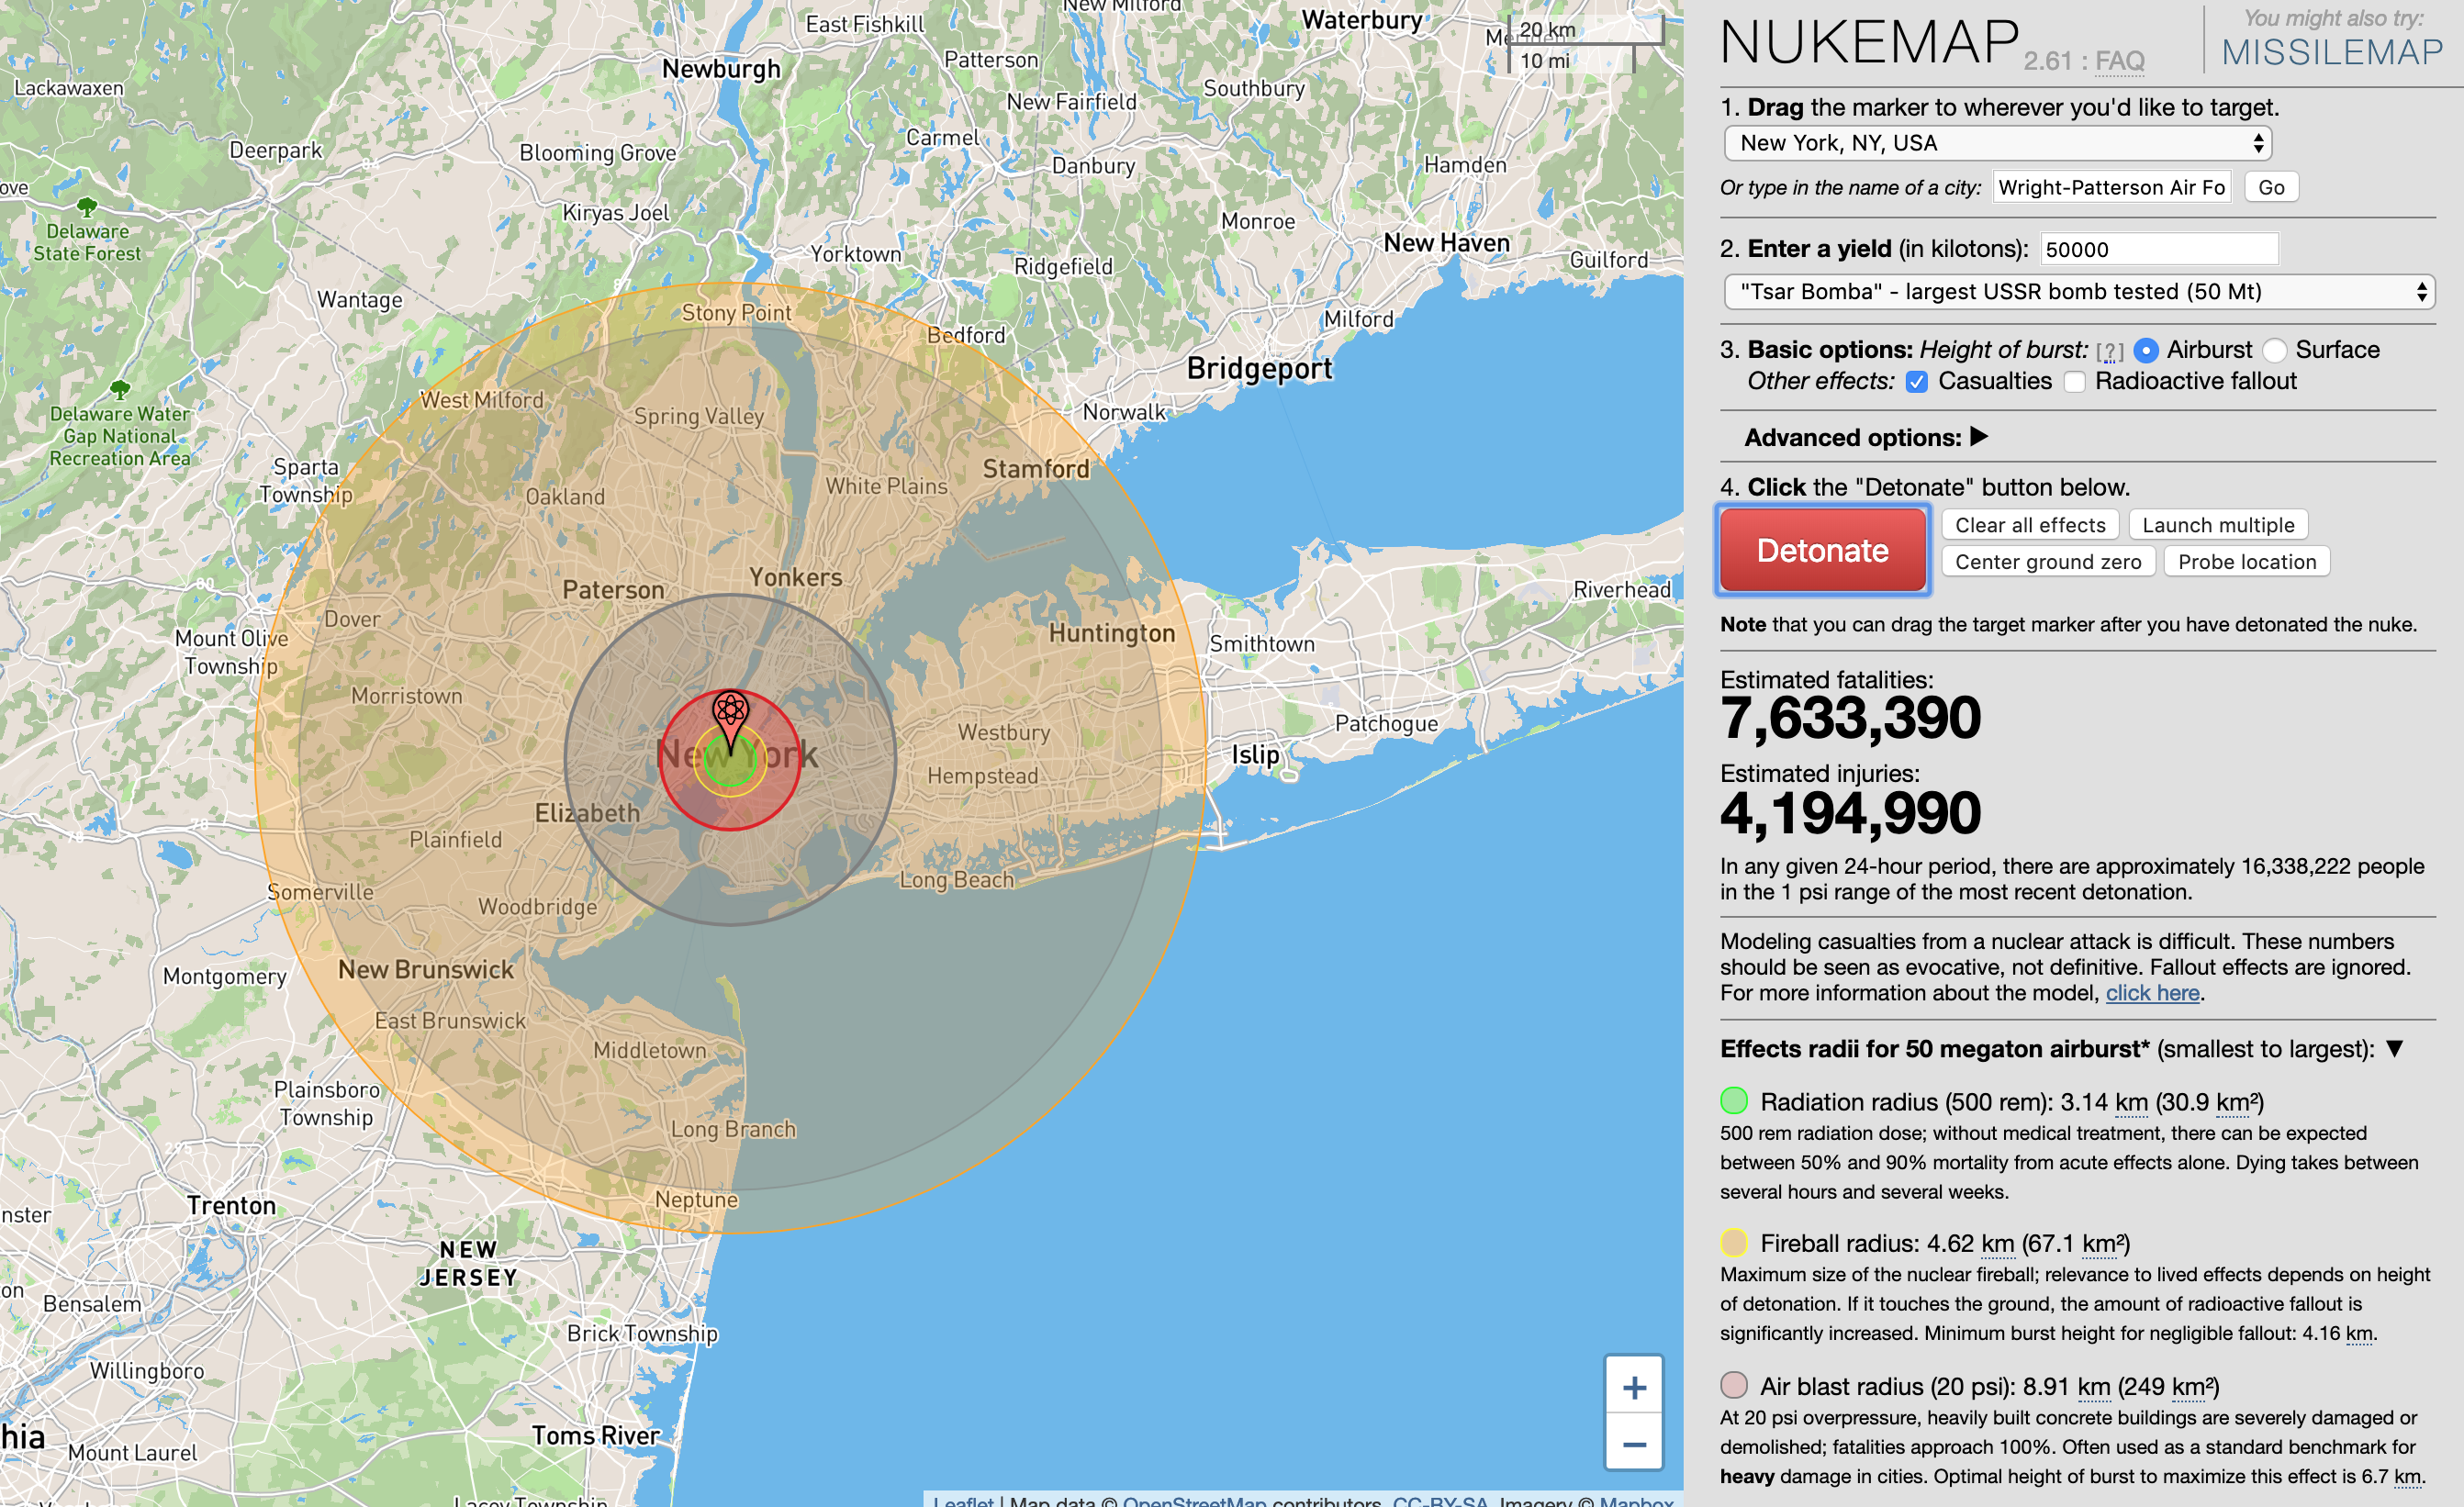 This app lets you see the destructive power of nukes on your hometown